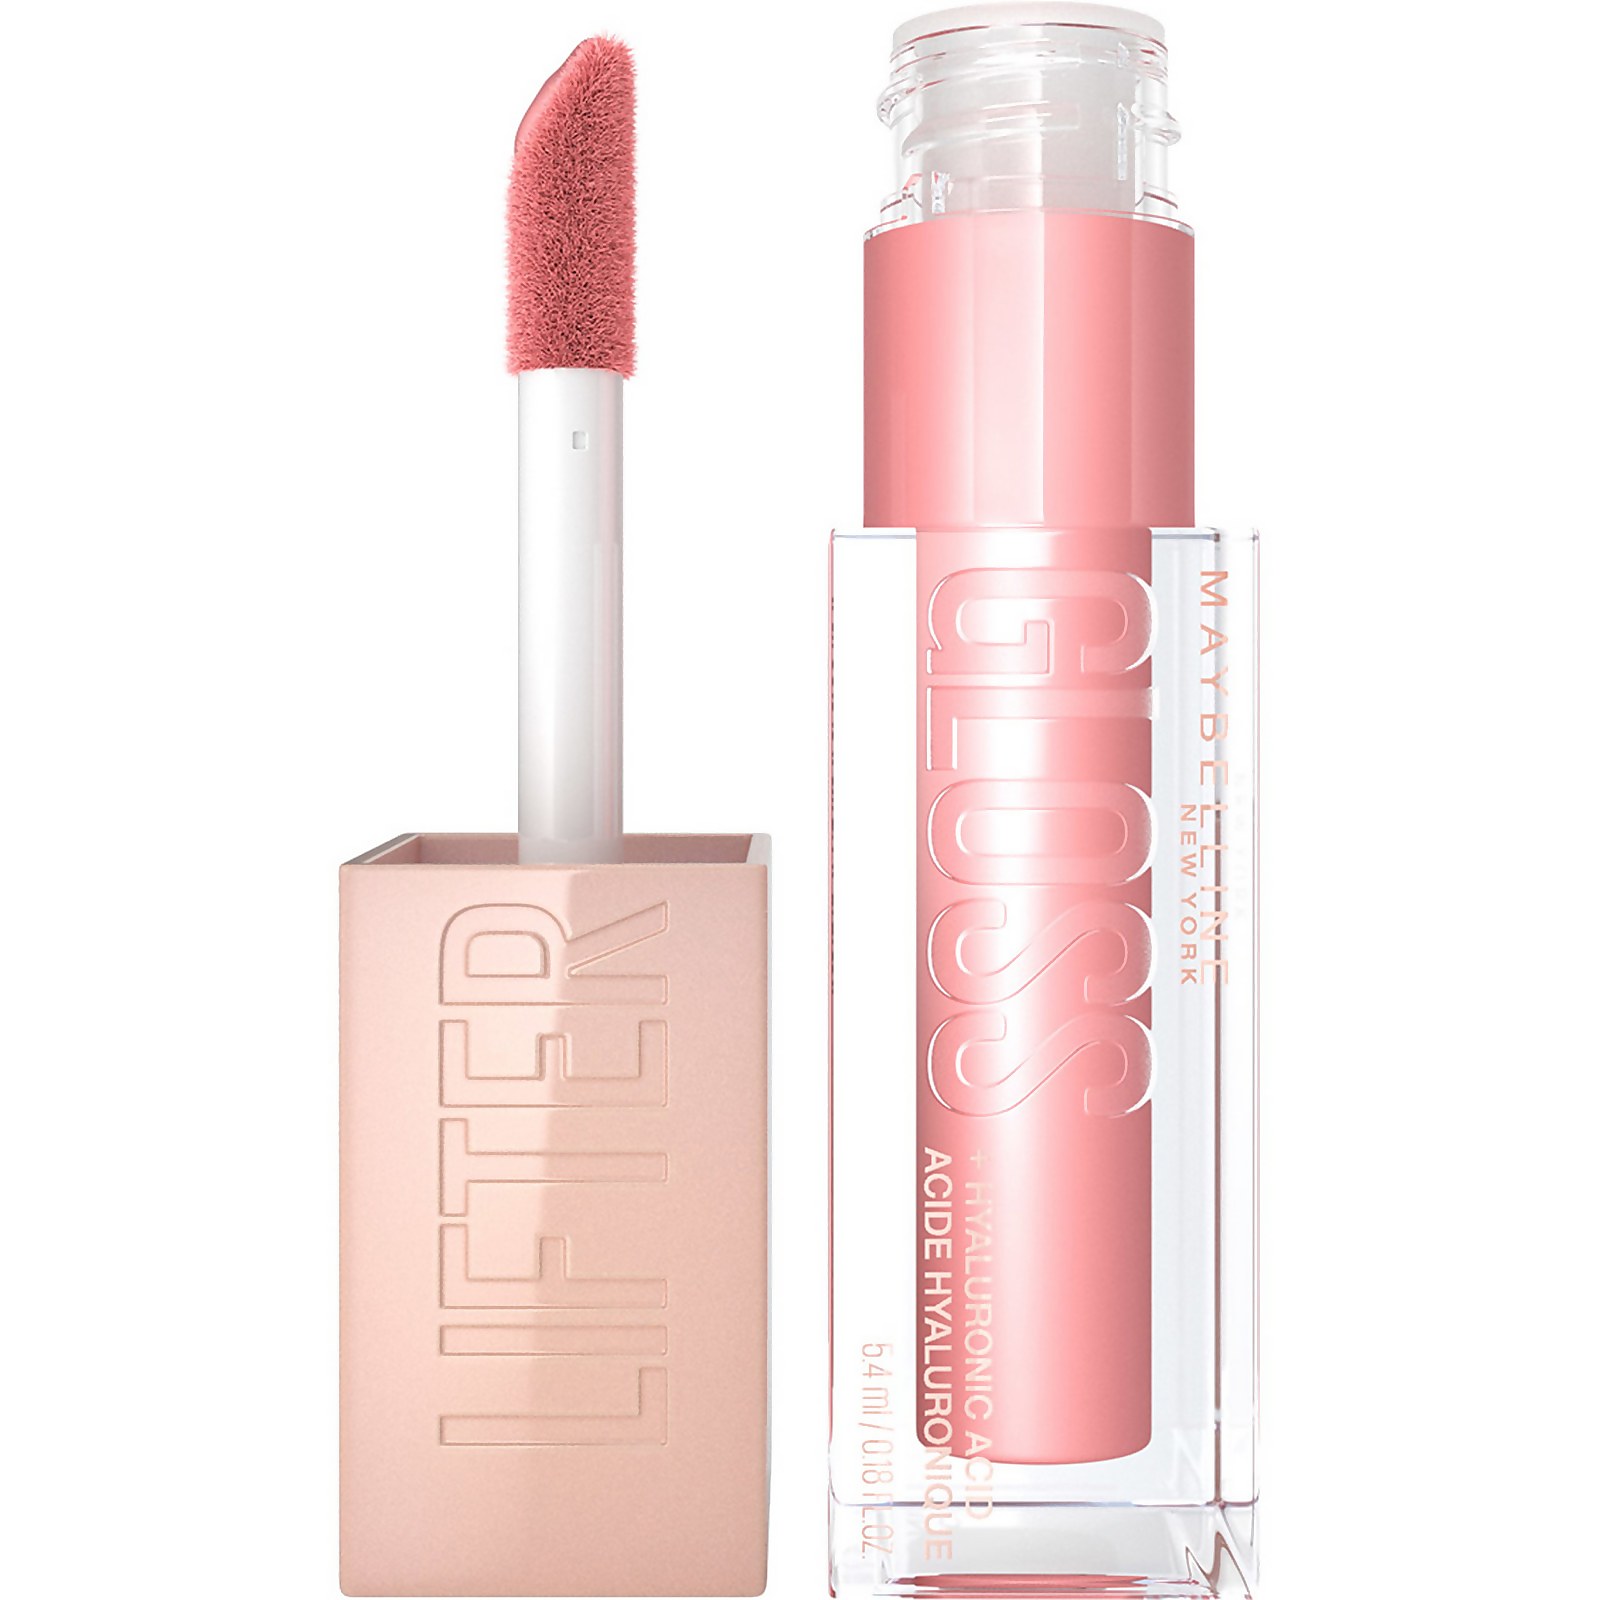 Image of Maybelline Lifter Gloss Hydrating Lip Gloss with Hyaluronic Acid 5g (Various Shades) - 006 Reef